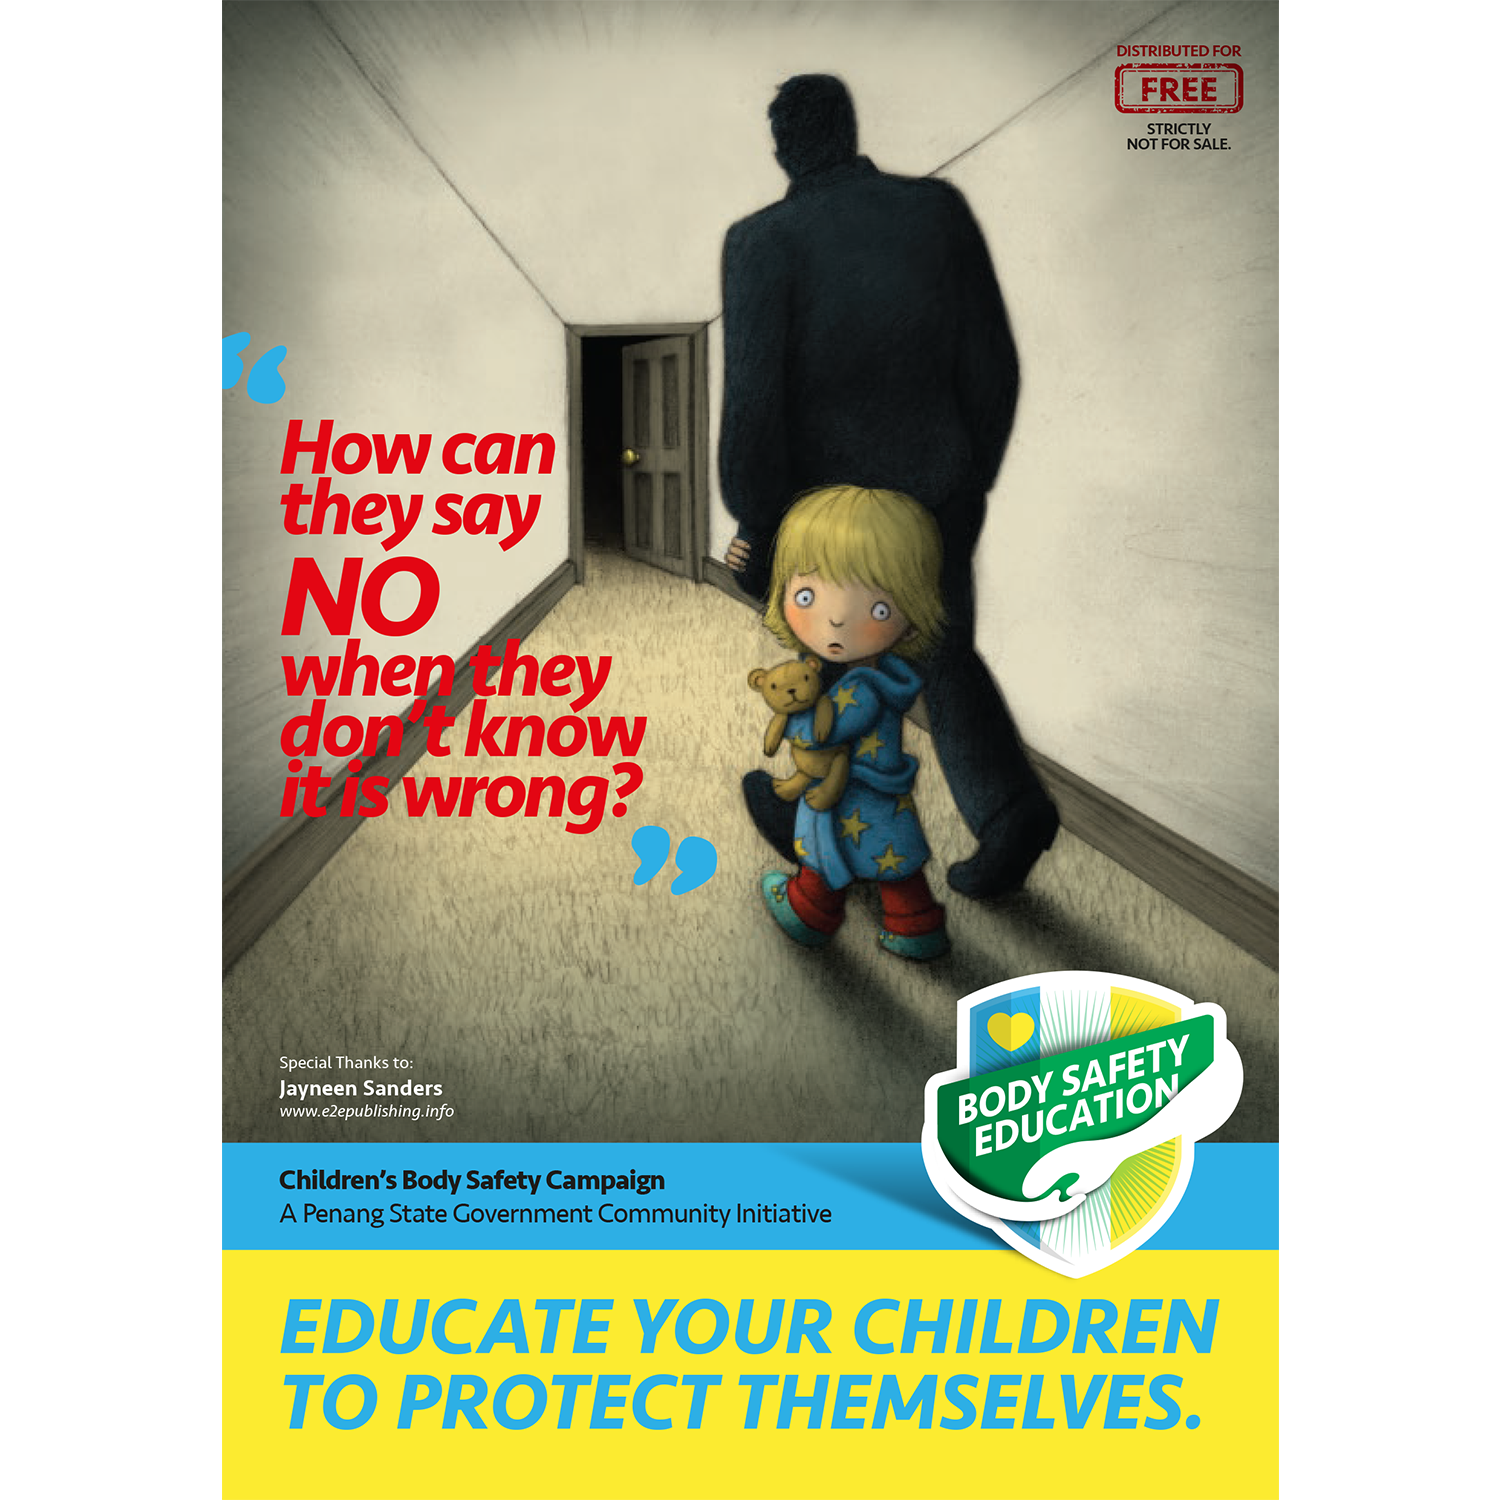 The cover of a Body Safety Education booklet showing a child being led down a corridor to a door by a shadowy adult figure.